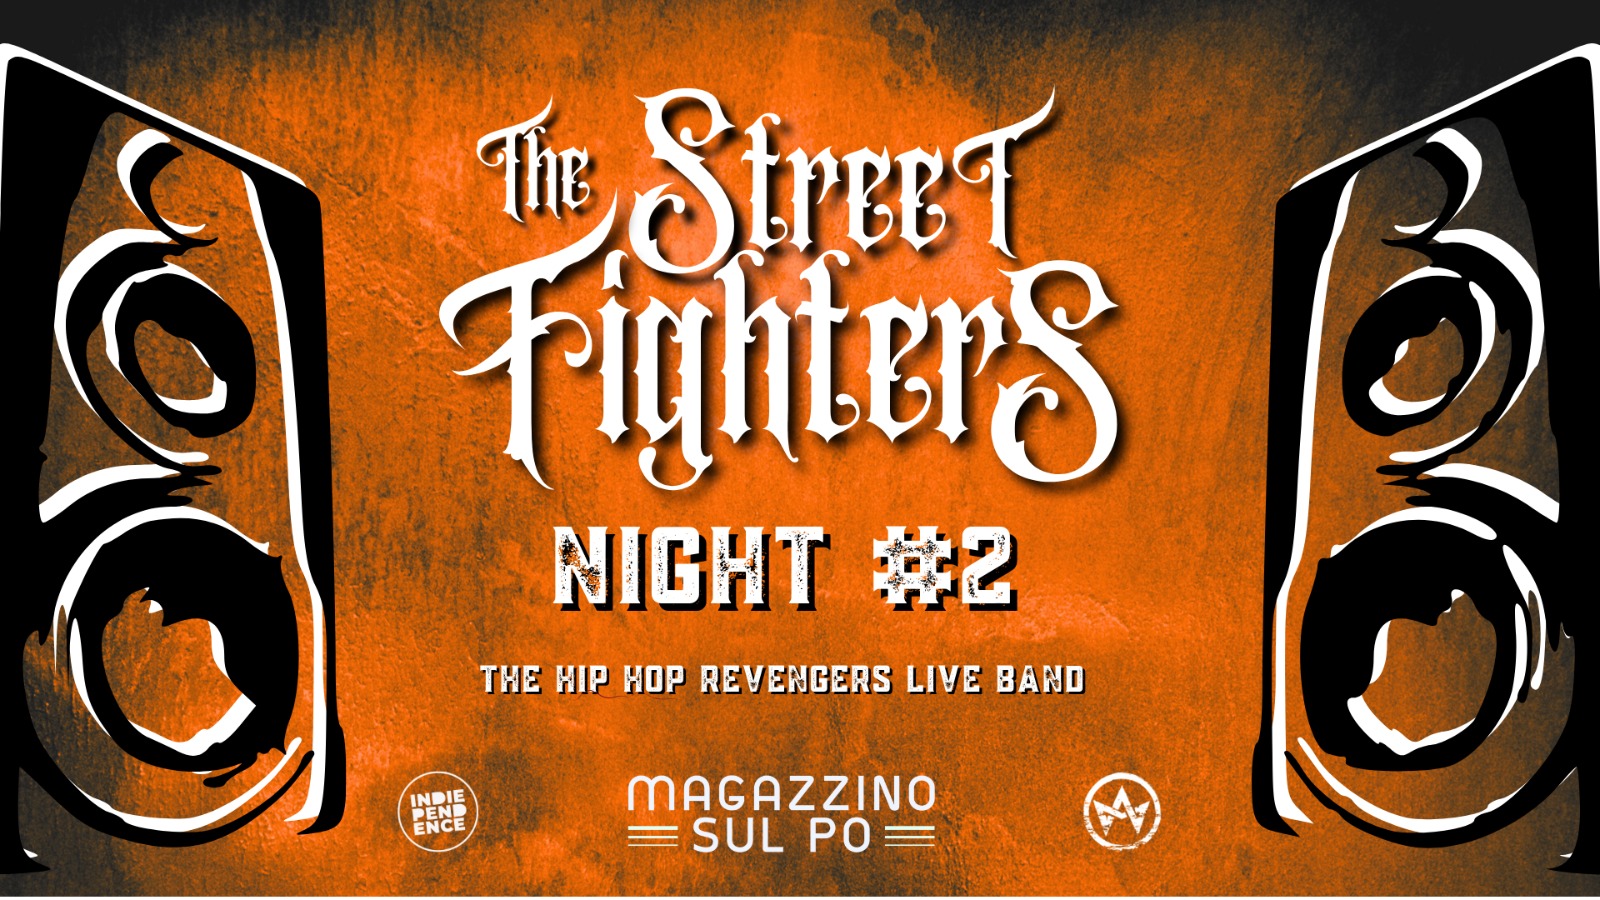 The street Fighters Night #2